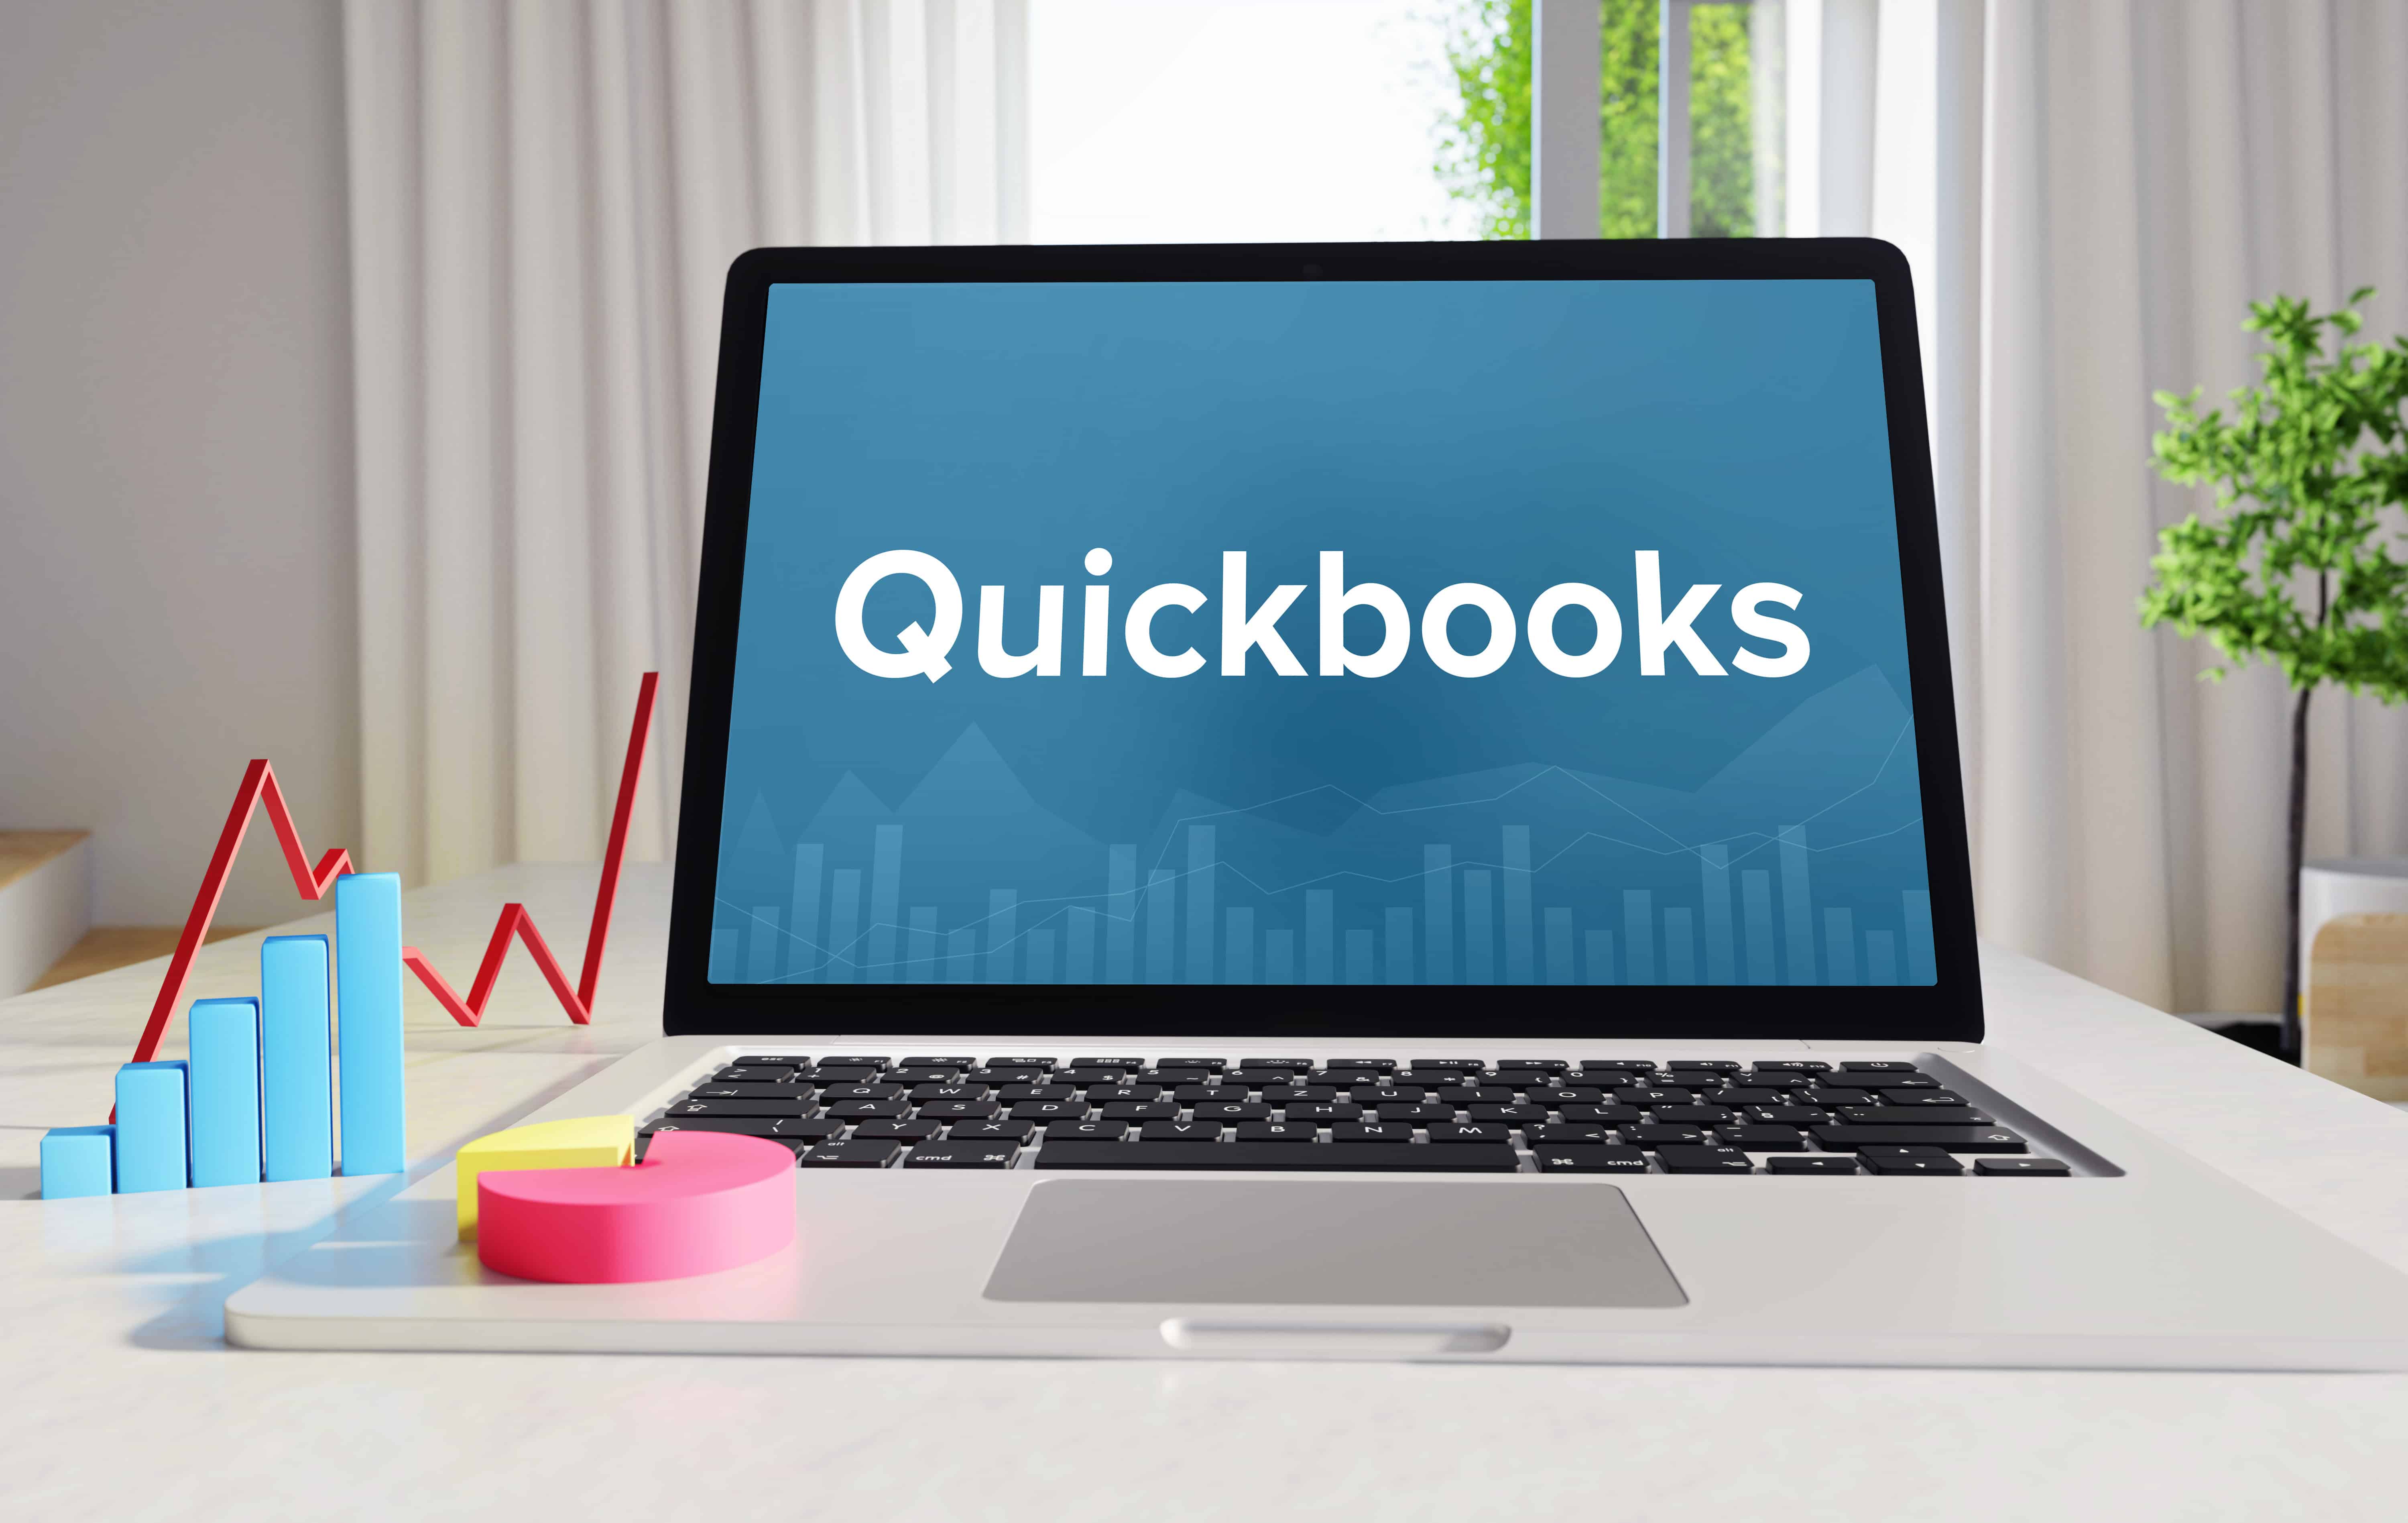 Quickbooks – Statistics/Business. Laptop in the office with term on the display. Finance/Economics.